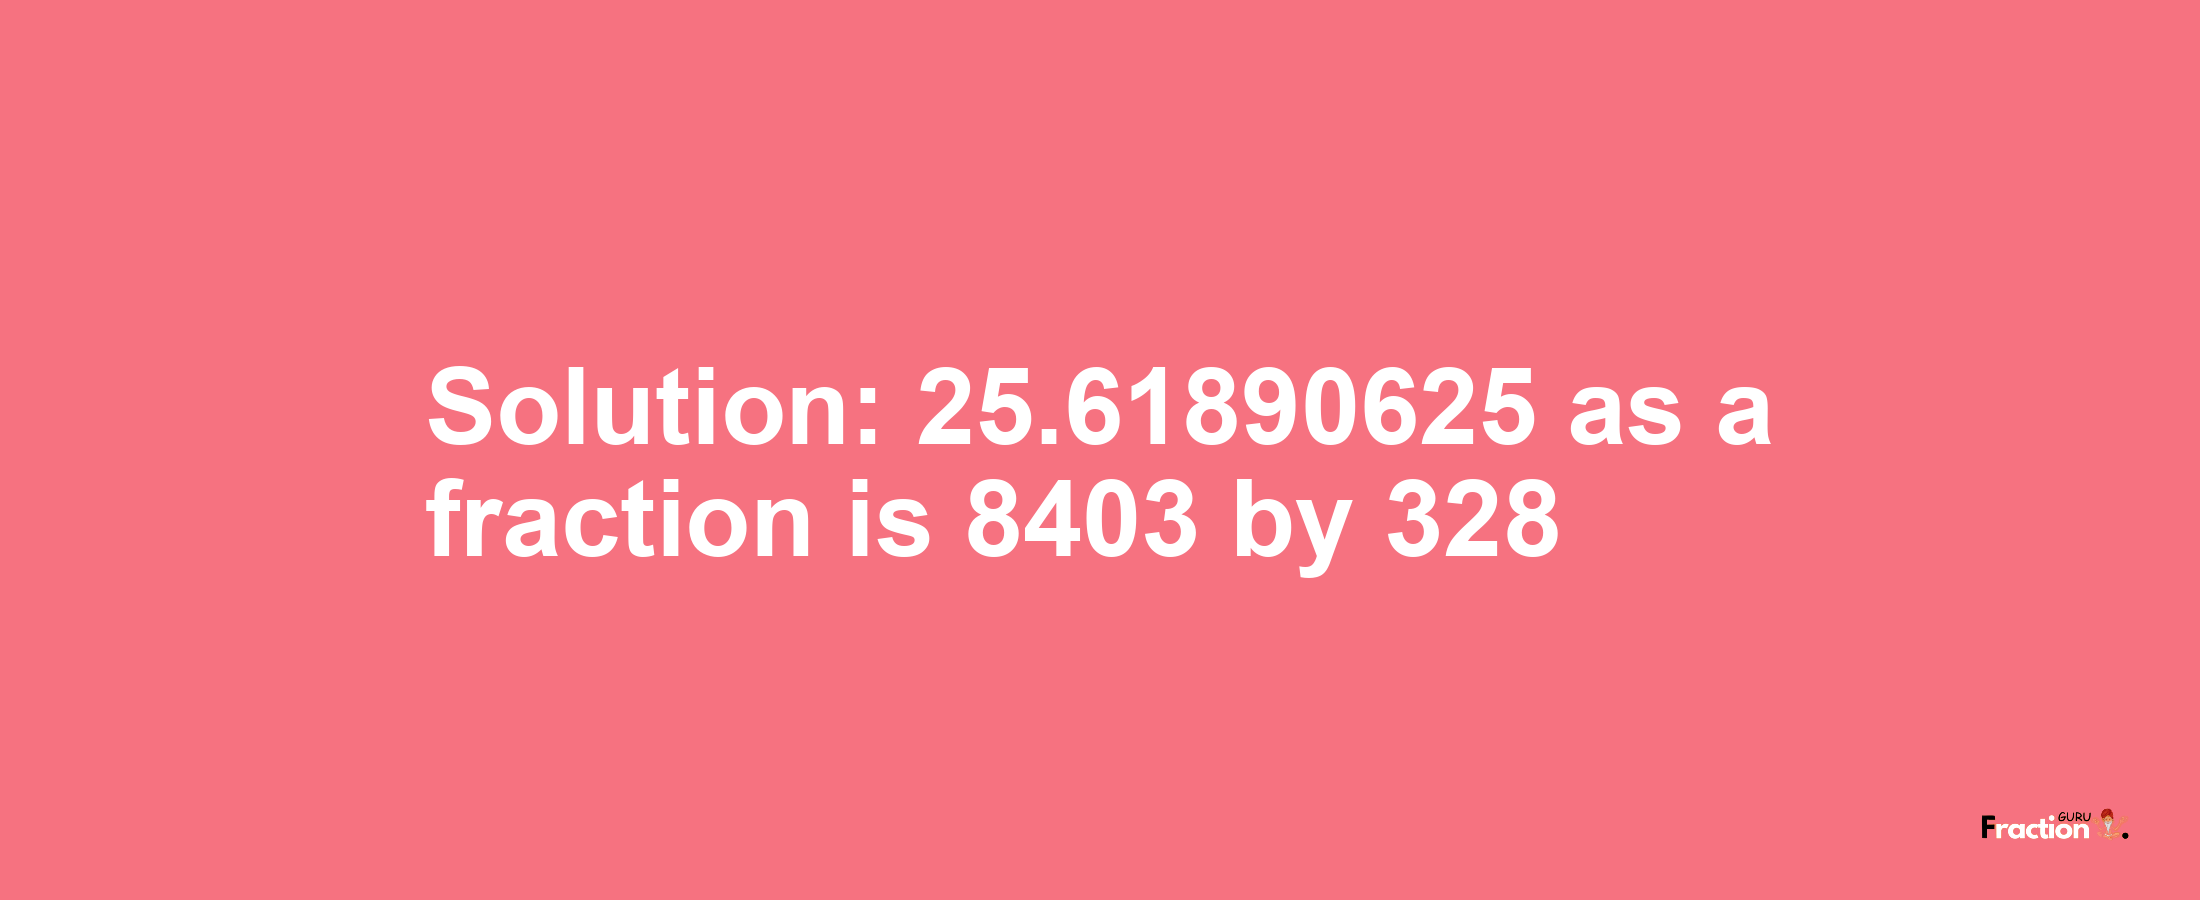 Solution:25.61890625 as a fraction is 8403/328